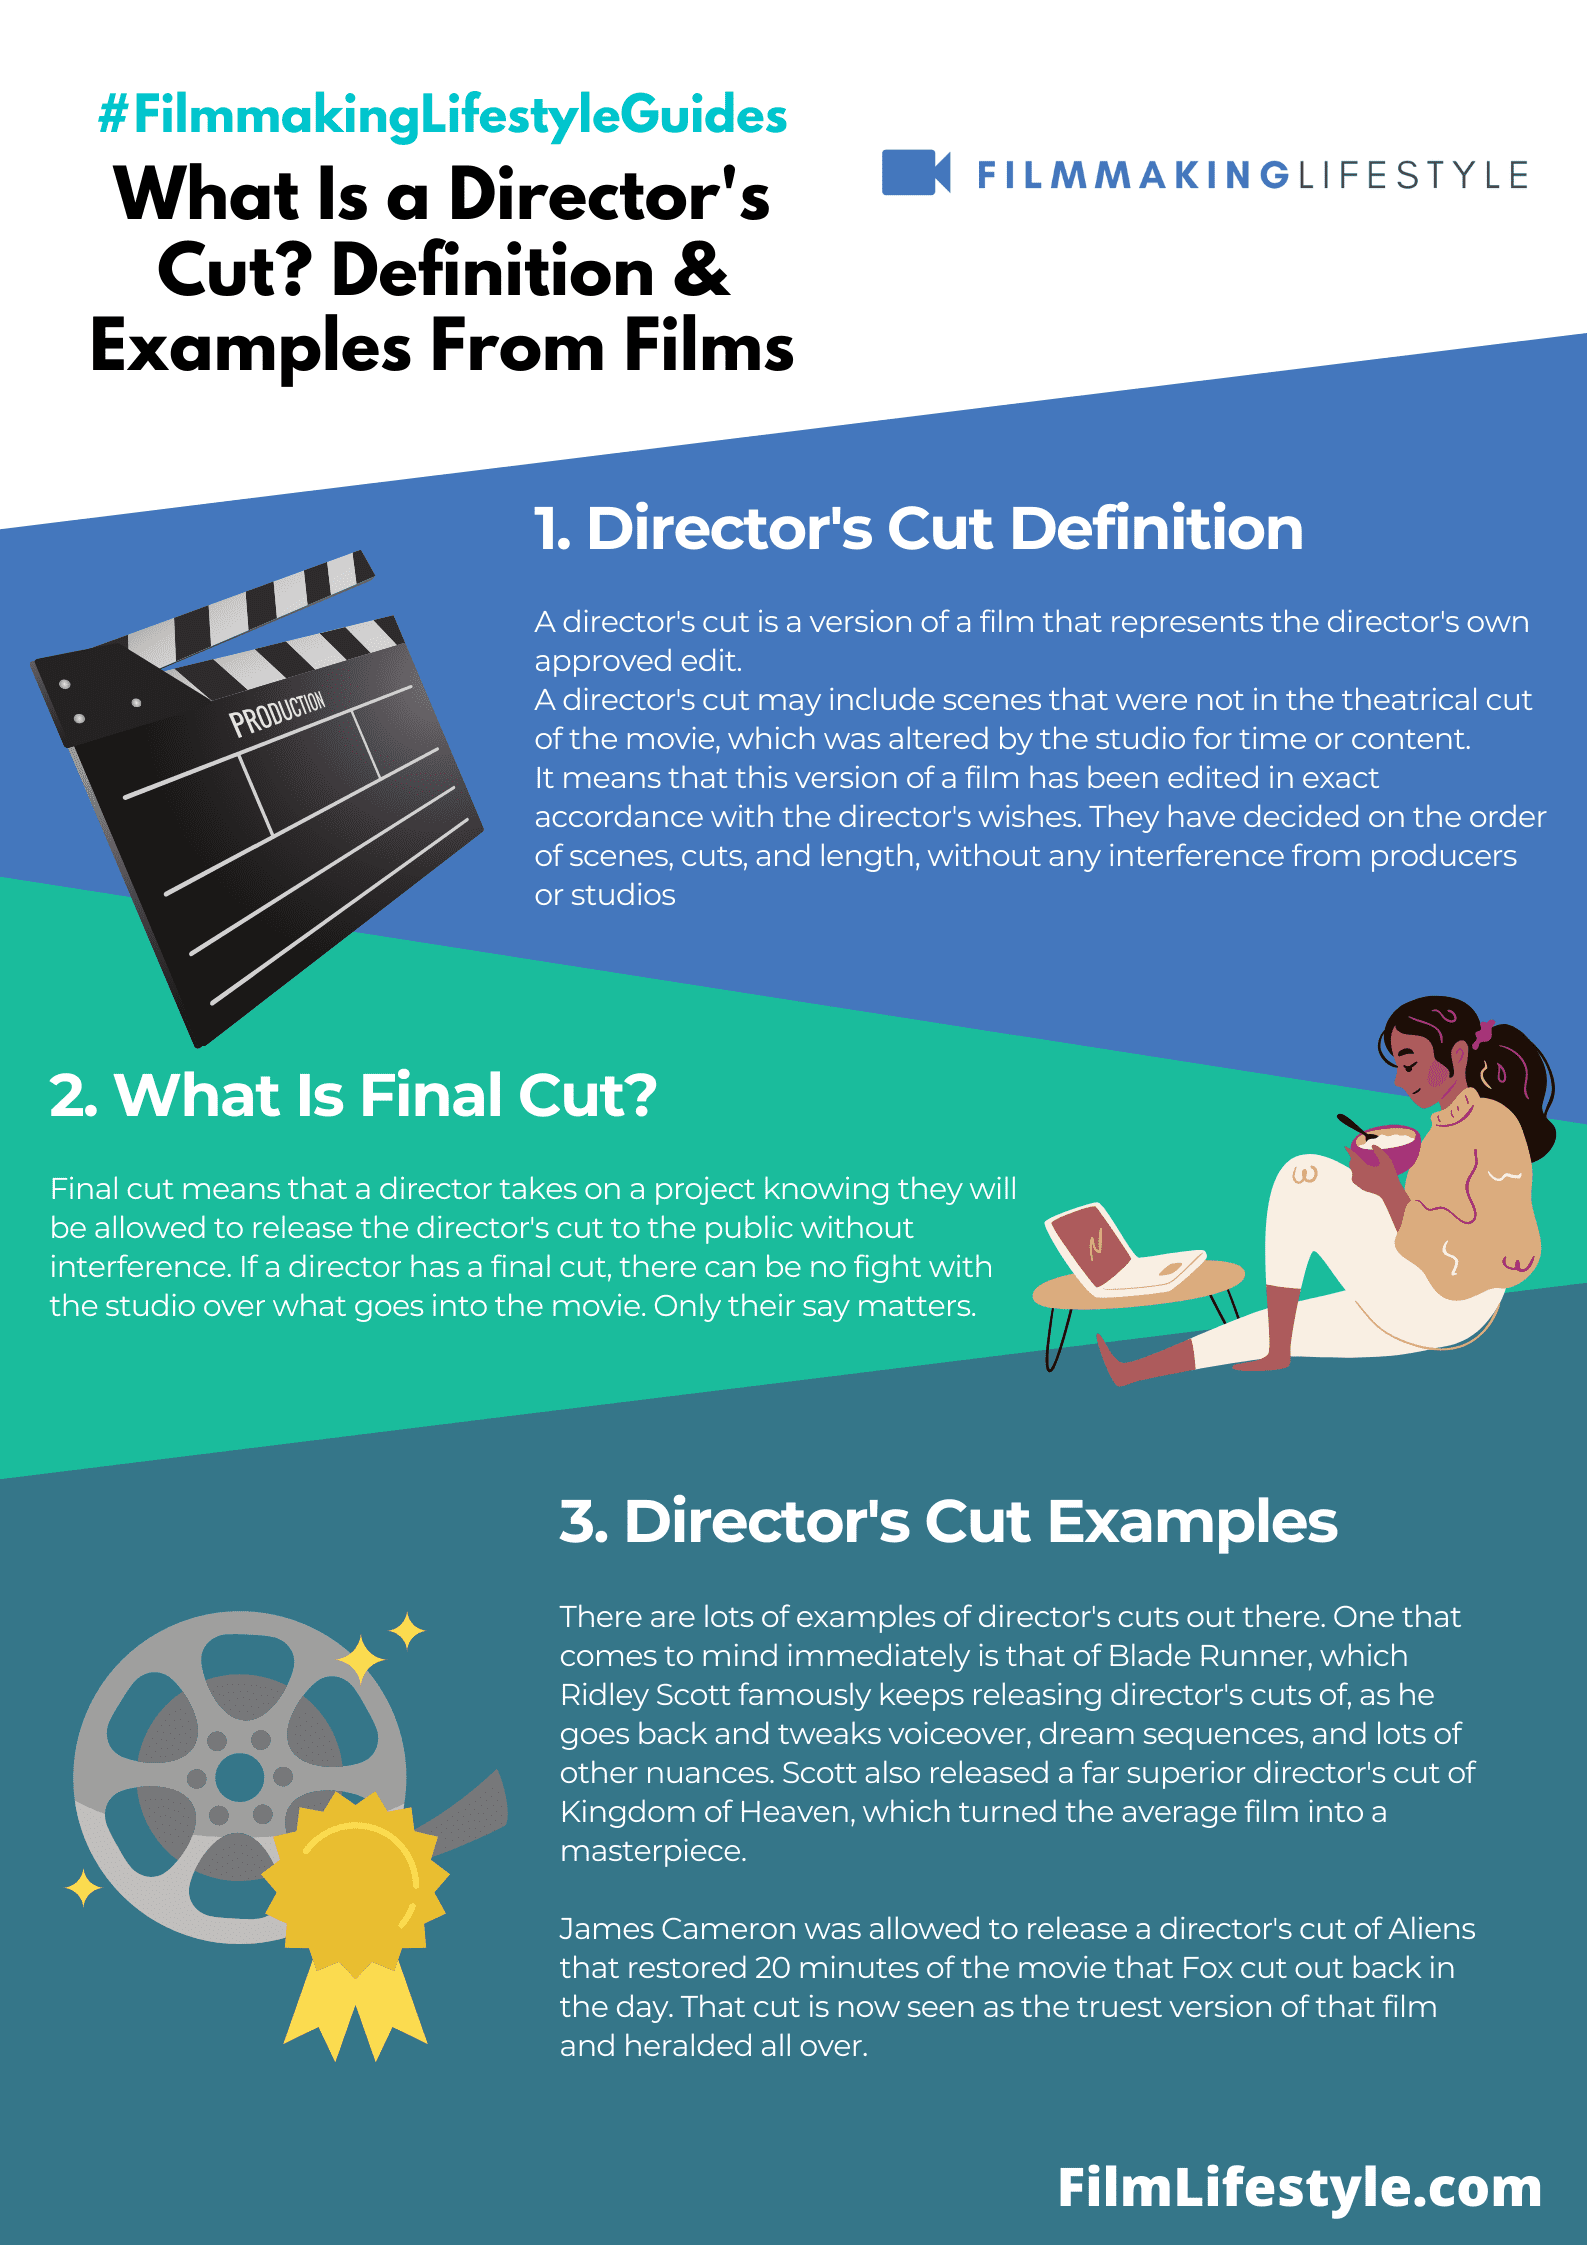 What Is a Director's Cut